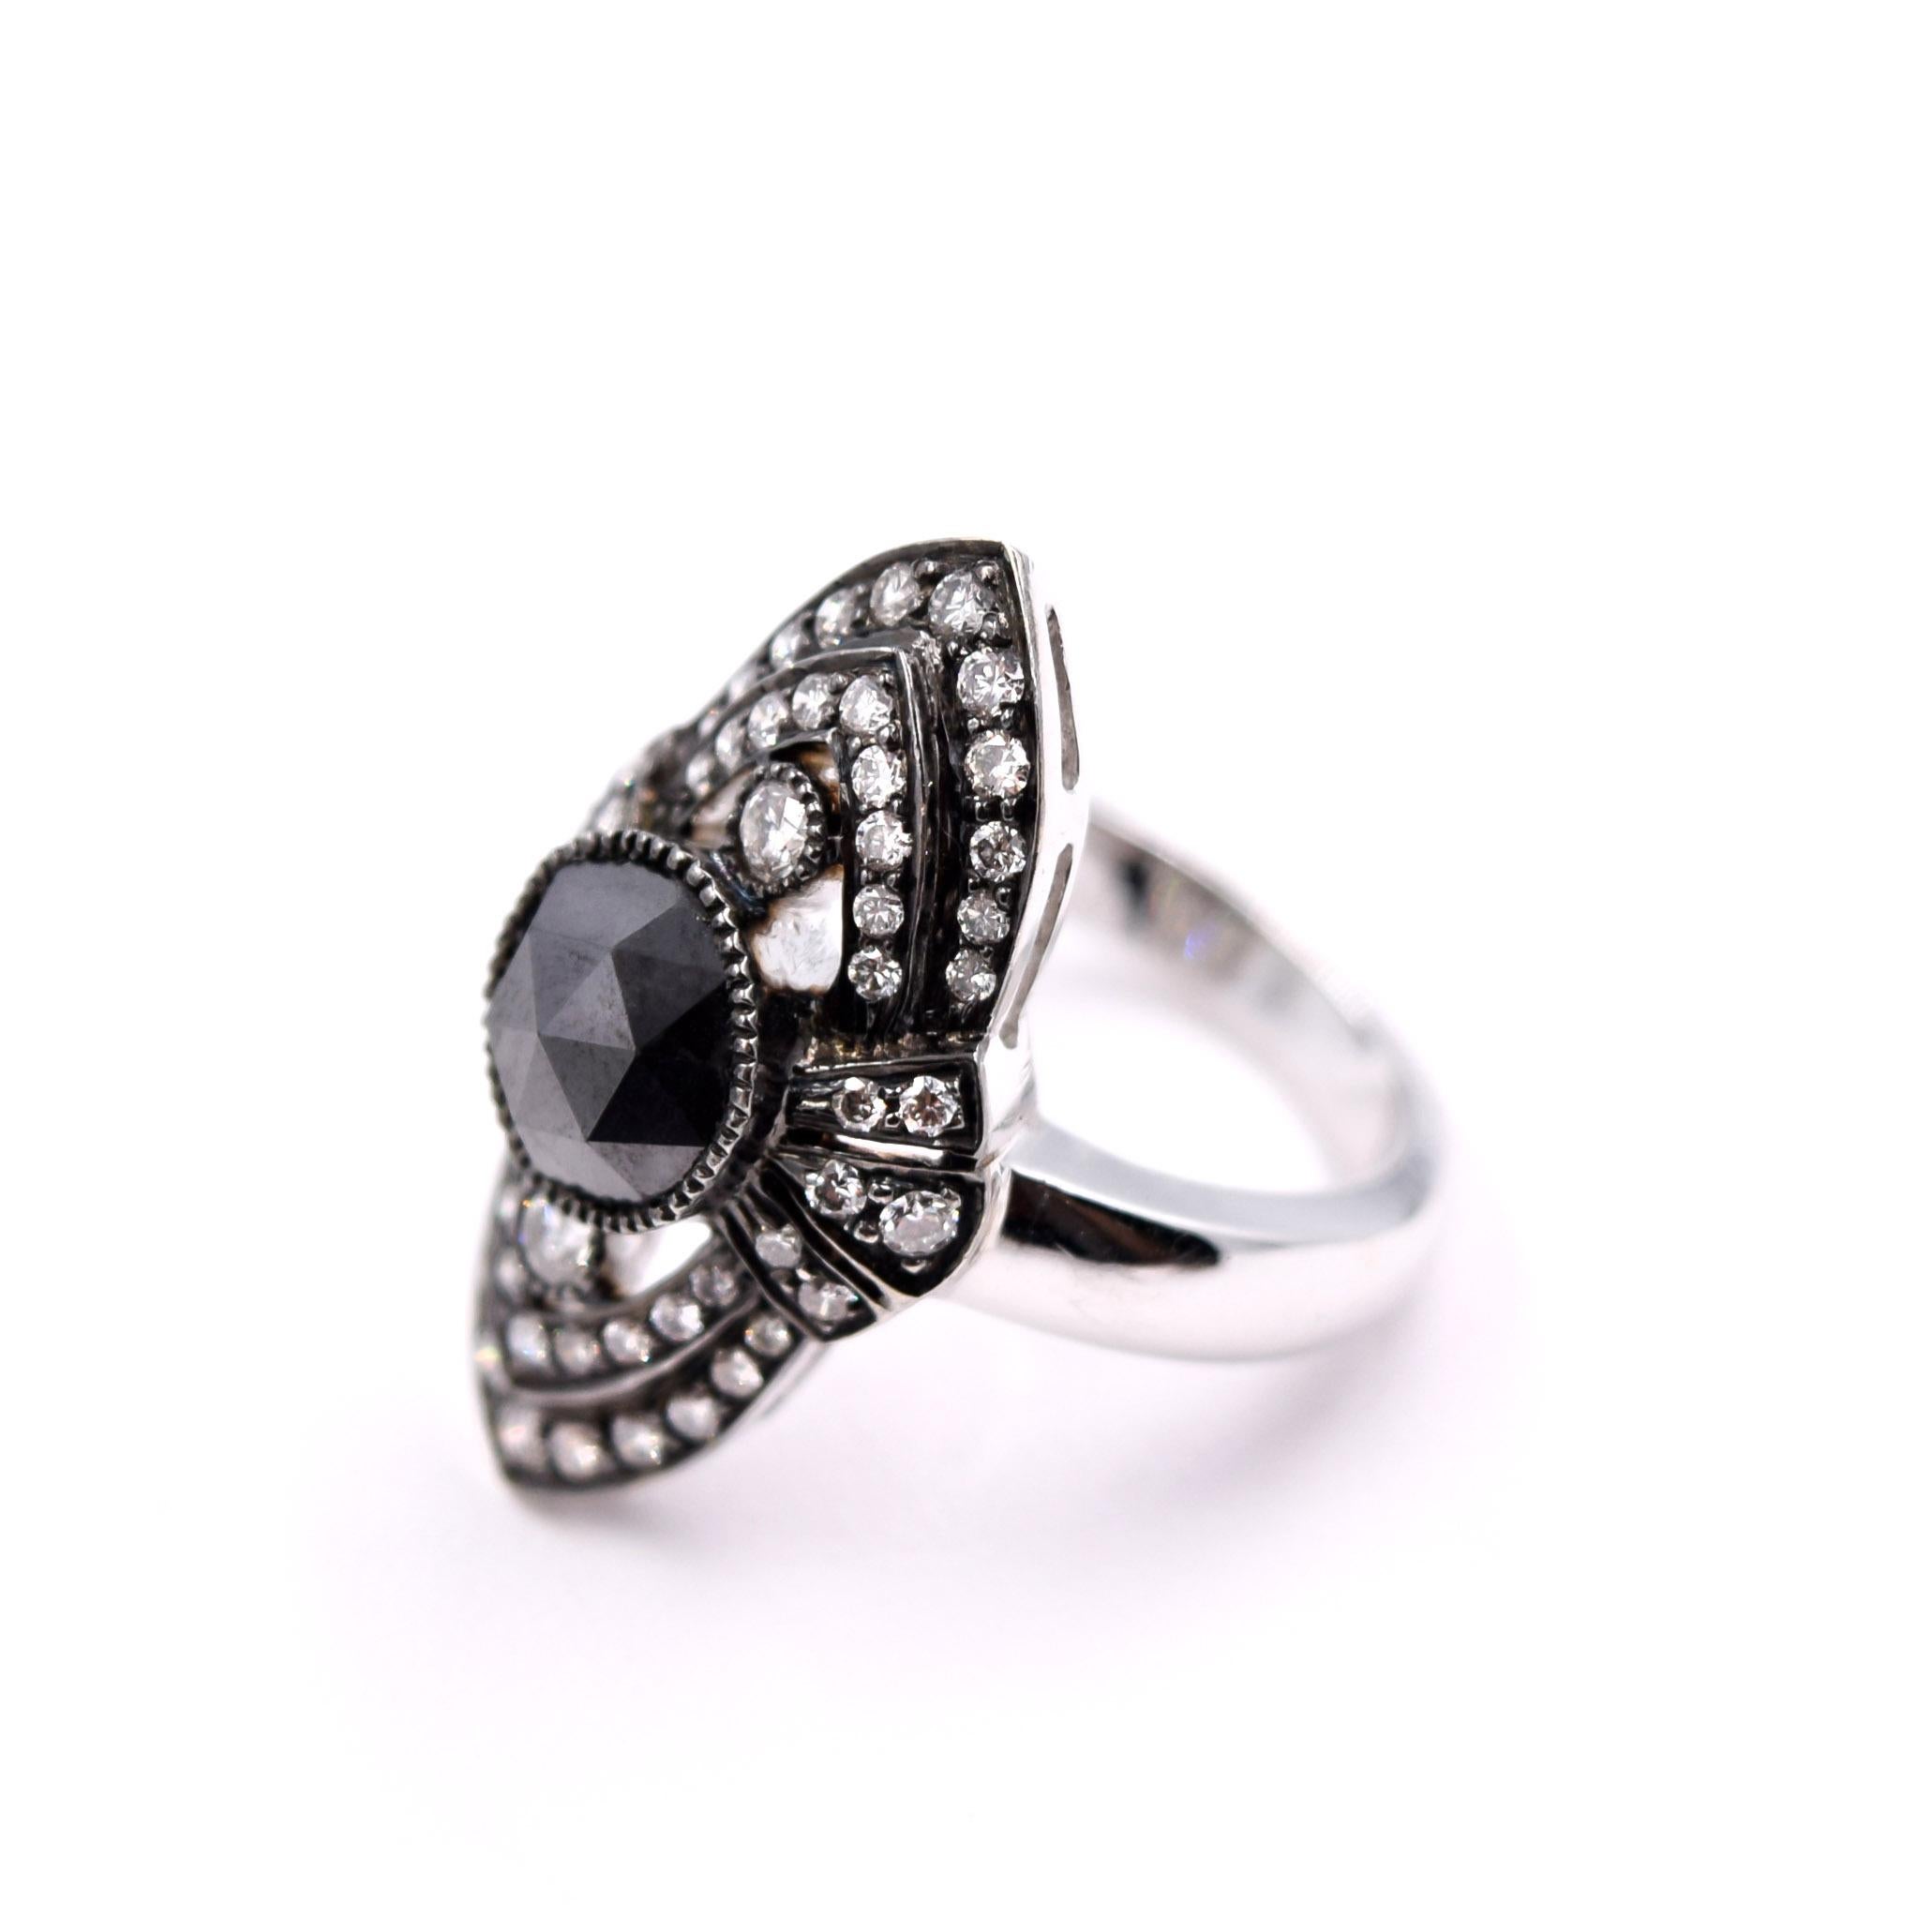 Contemporary 3.32 Carat Black Diamond Cocktail Ring in 18 Karat White Gold and Rhodium For Sale